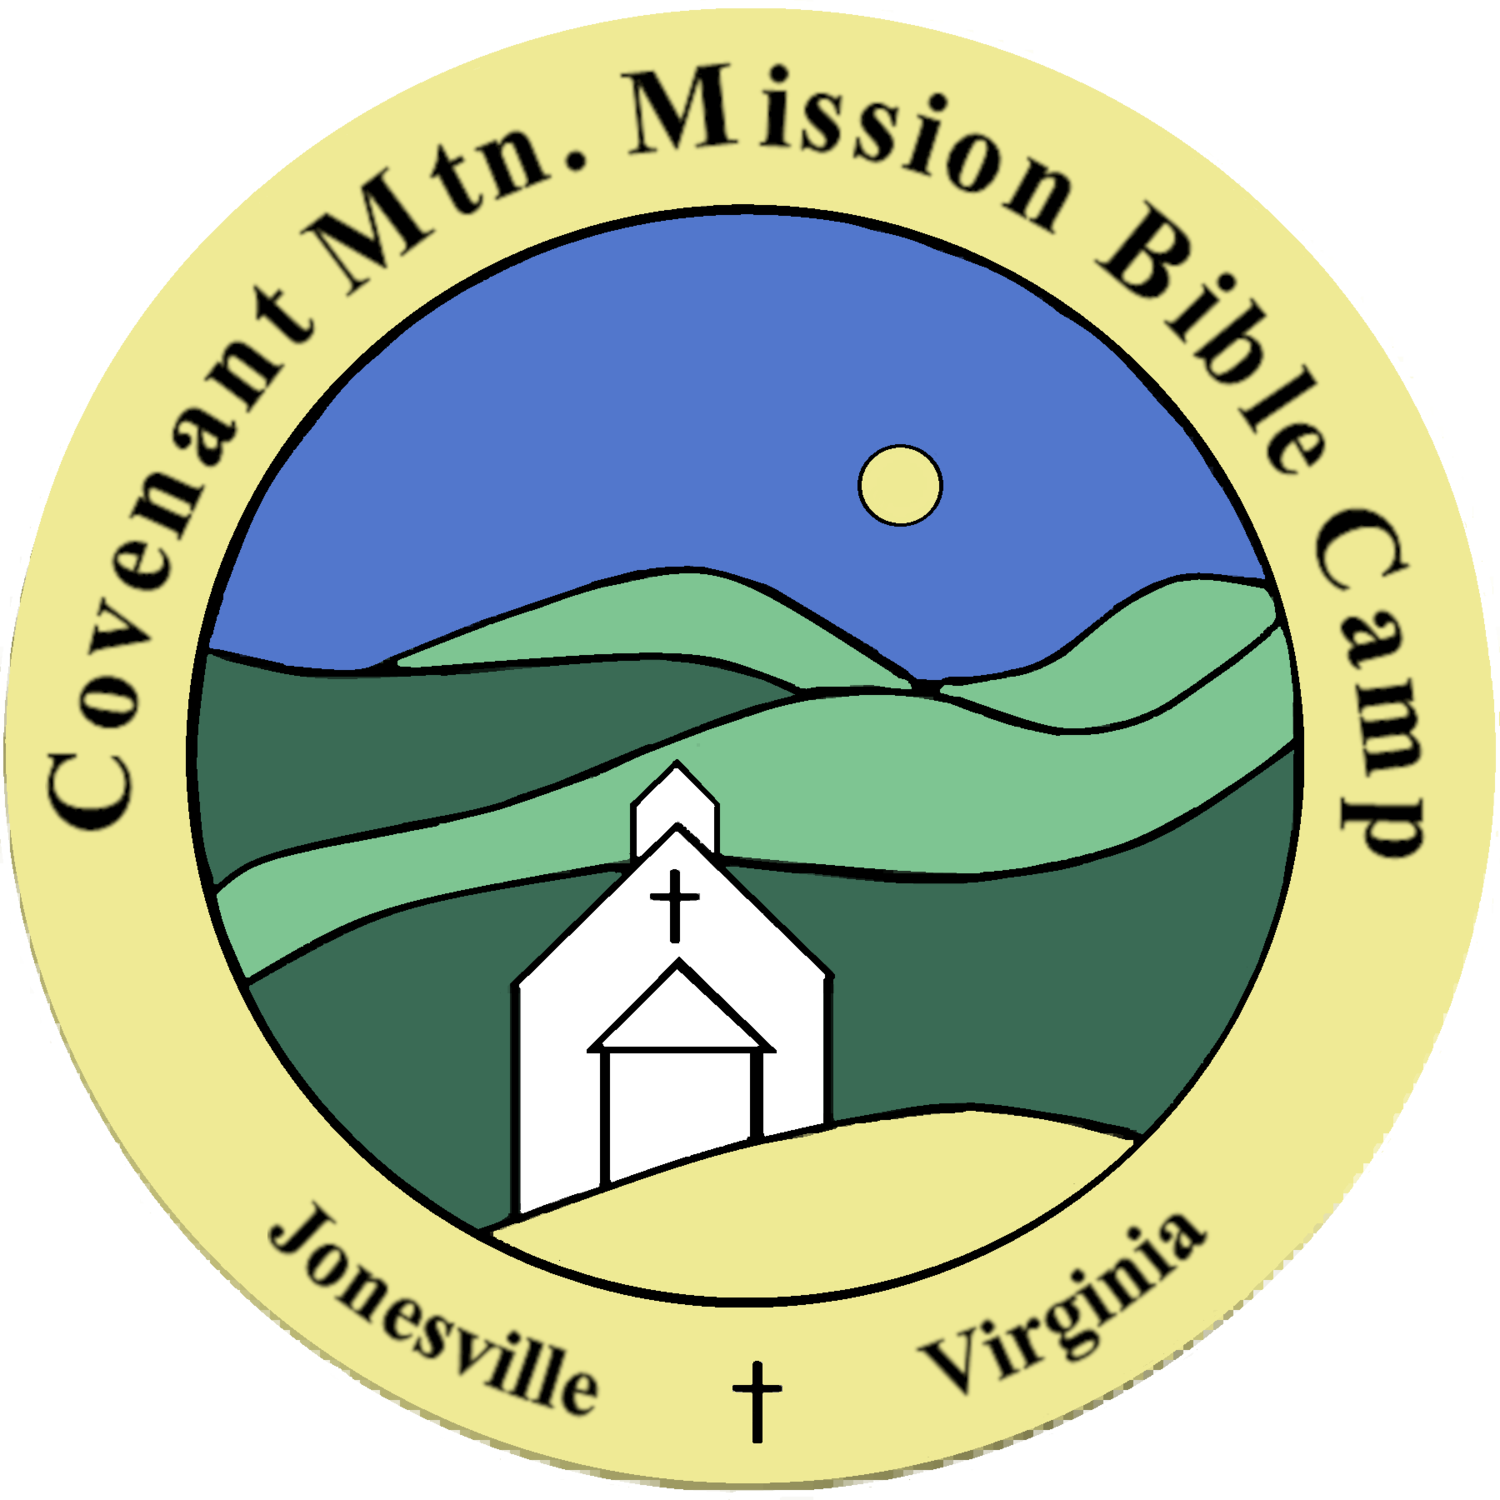 Covenant Mountain Mission Bible Camp